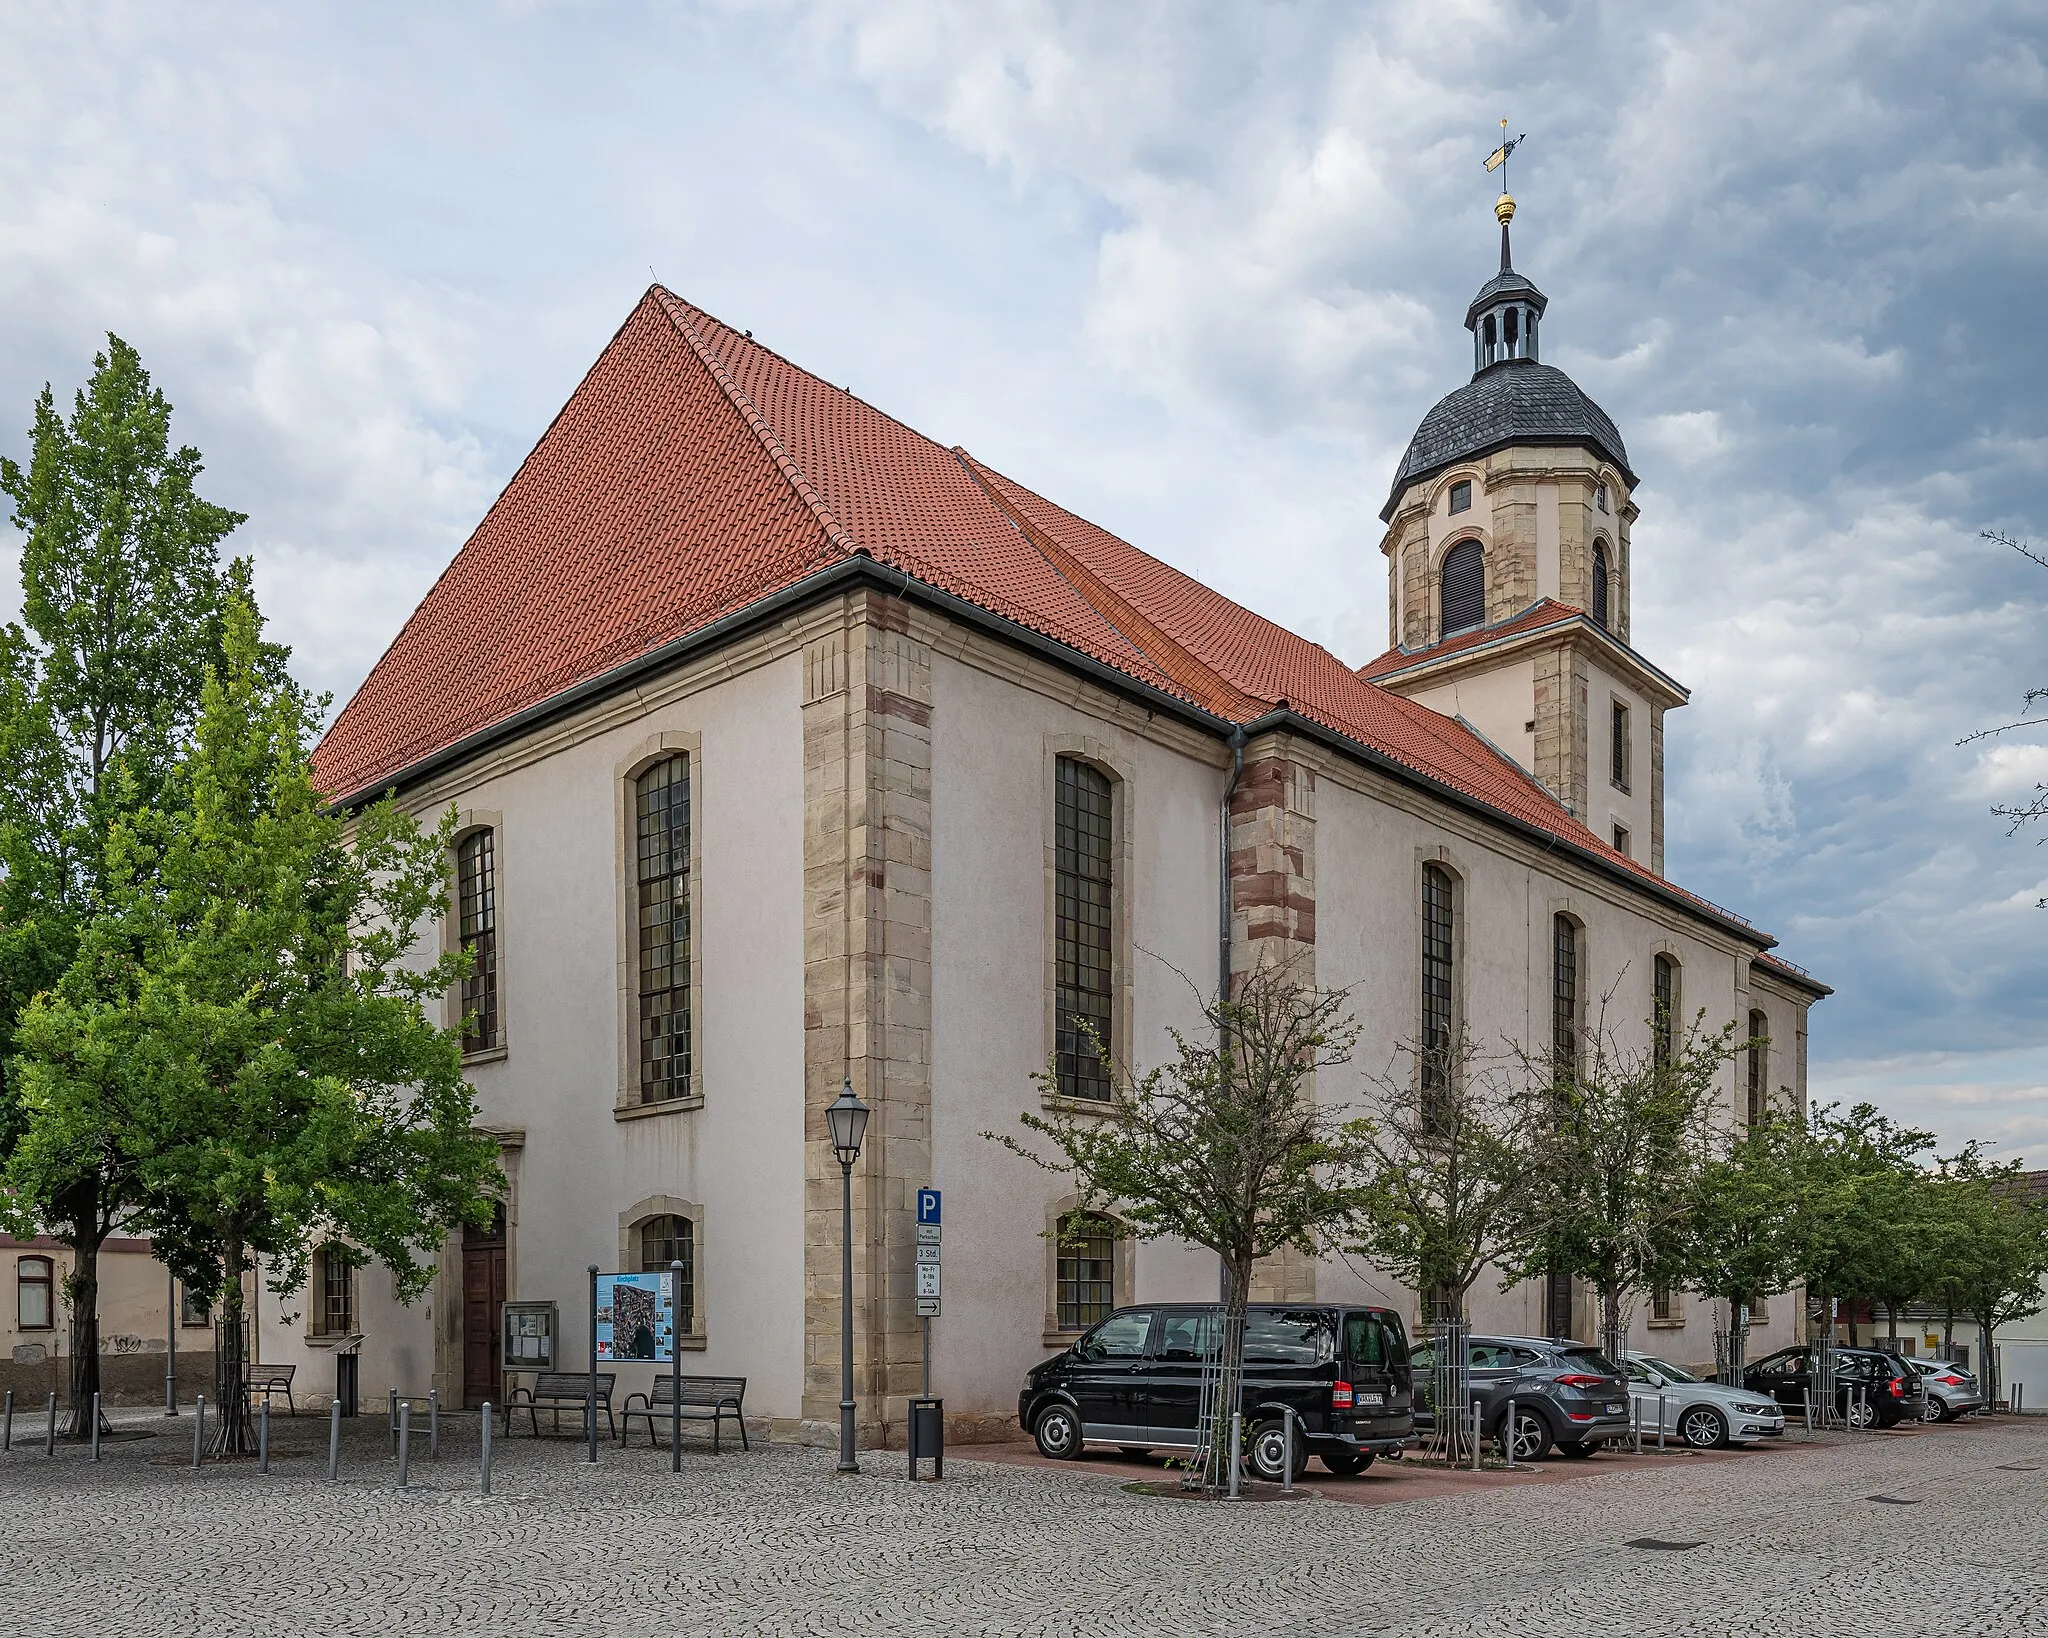 Photo showing: Church in Bad Salzungen (Thuringia, Germany)